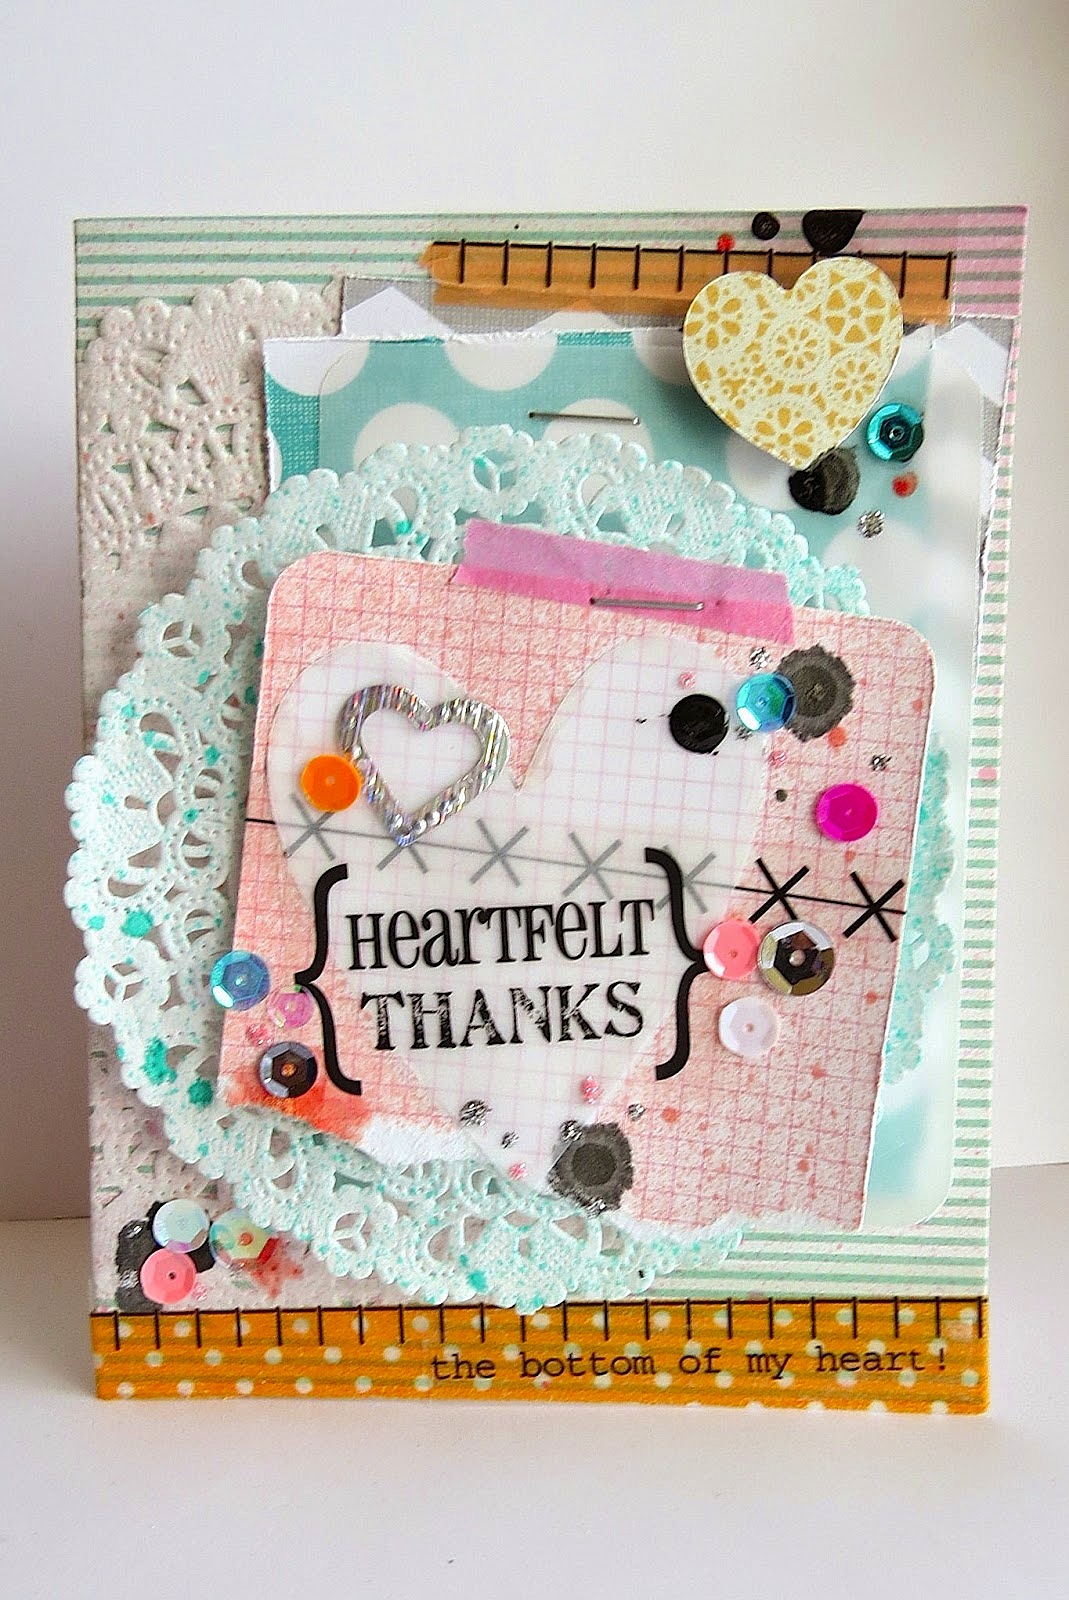 SRM Stickers Blog - Doily Thank You Card Tutorial by Shannon - #card #thanks #doilies #stickers #stitches #borders $fancy #sentiments #tutorial